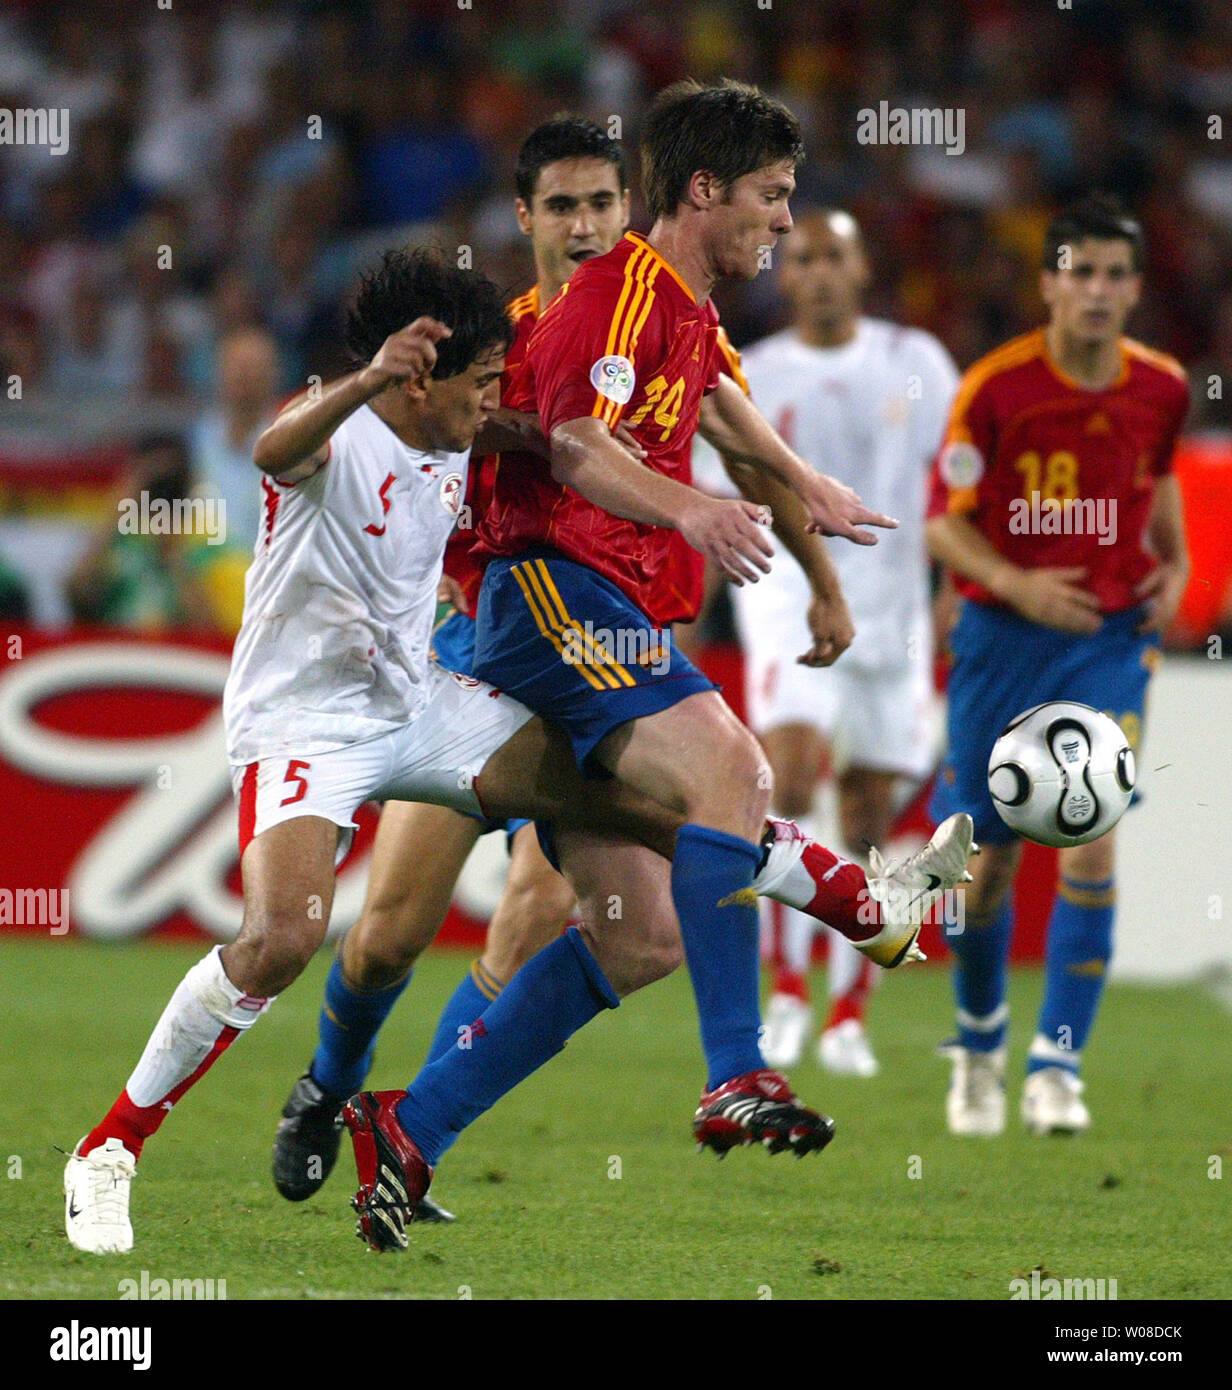 Tunisia's Zied Jaziro (5) kicks at the ball from behind Spain's Xabi Alonso (14) in World Cup soccer action in Stuttgart, Germany on June 19, 2006. Spain defeated Tunisia 3-1.  (UPI Photo/Arthur Thill) Stock Photo